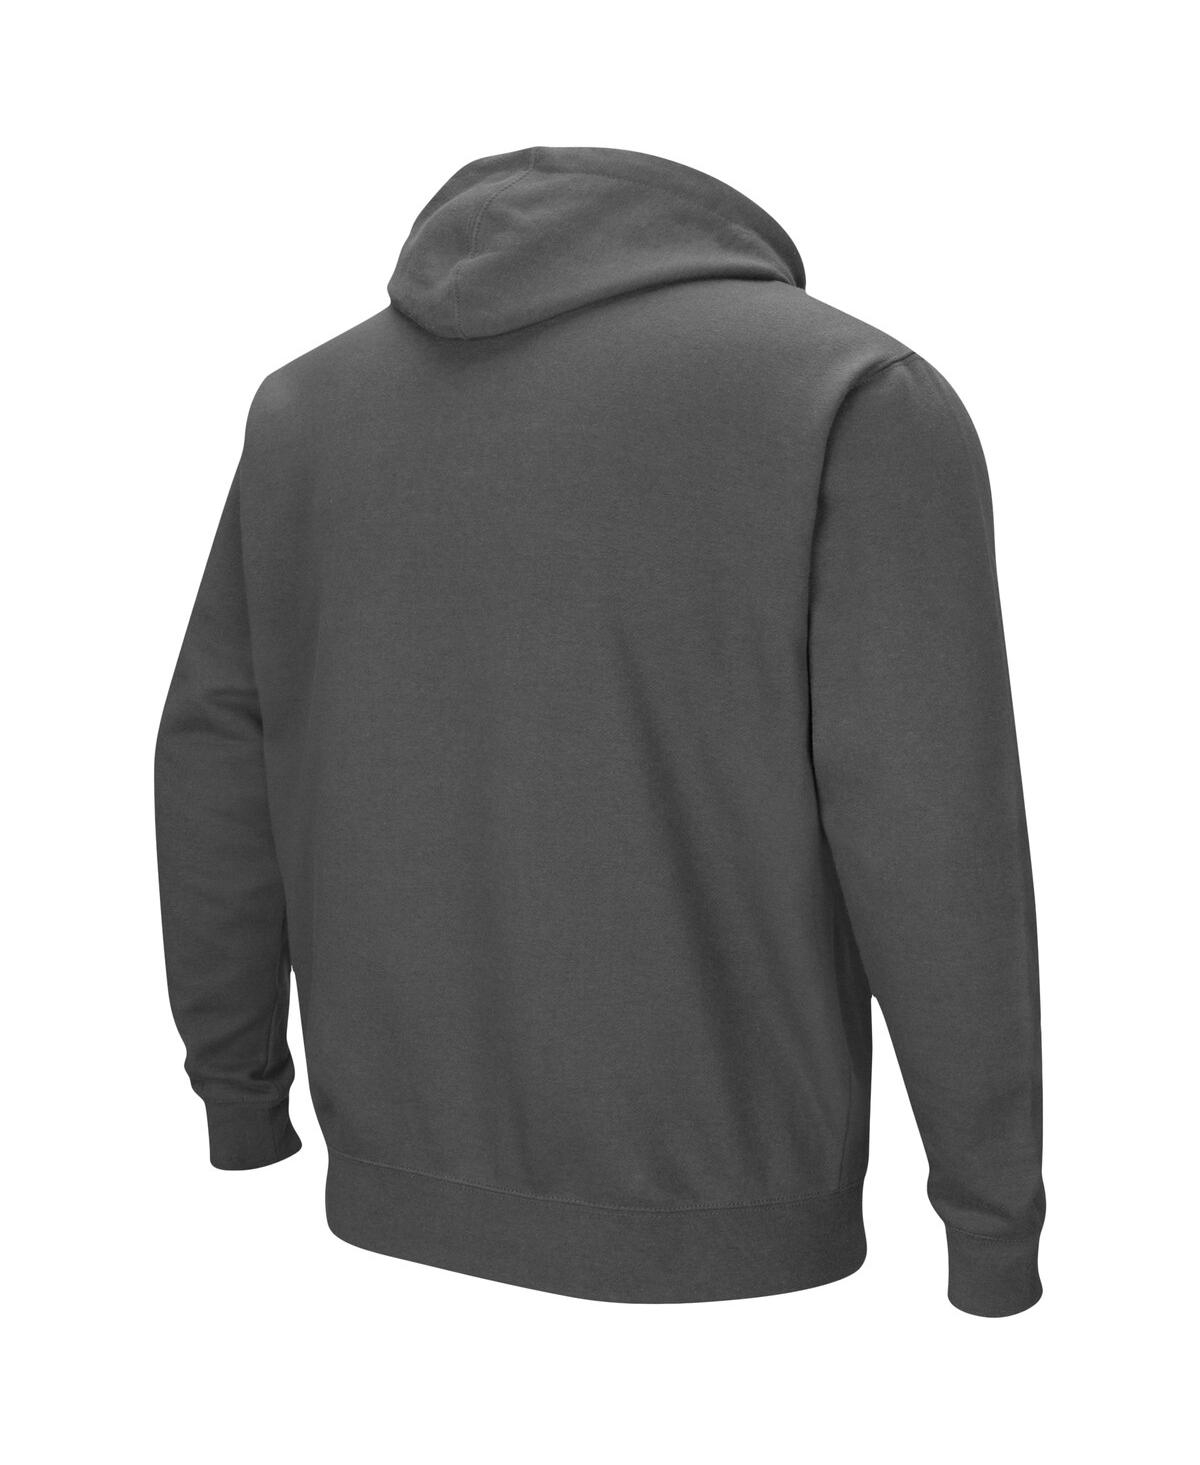 Shop Colosseum Men's Charcoal Iowa State Cyclones Arch Logo 3.0 Pullover Hoodie